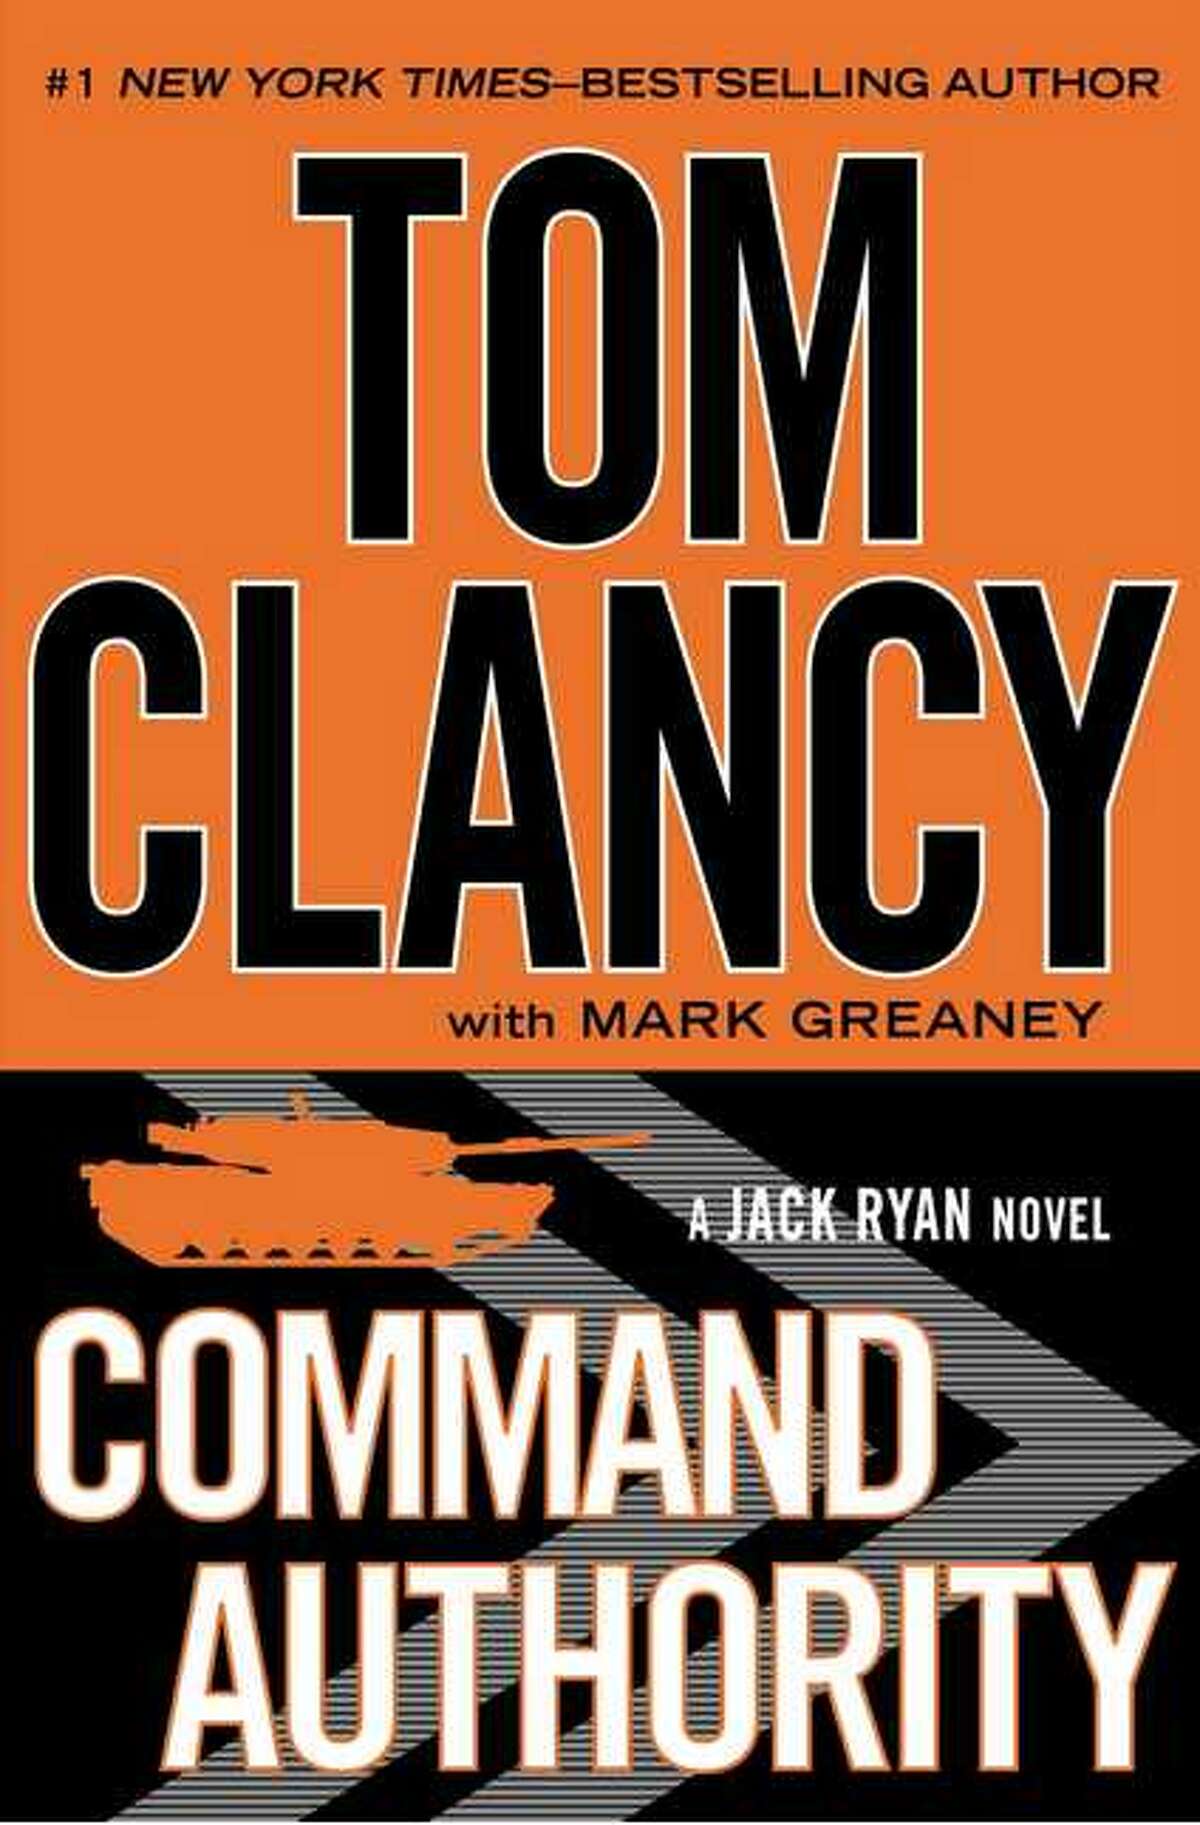 Although noted author Tom Clancy died on Oct. 2, his characters aren't finished. His last book, "Command Authority" comes out today and continues the story of President Jack Ryan and his son, Jack Jr., an analyst for a top secret intelligence agency. A new Clancy film, "Jack Ryan: Shadow Recruit" staring Chris Pine is slated to hit theaters on Jan. 17. Take a look back at Clancy's other thrillers.